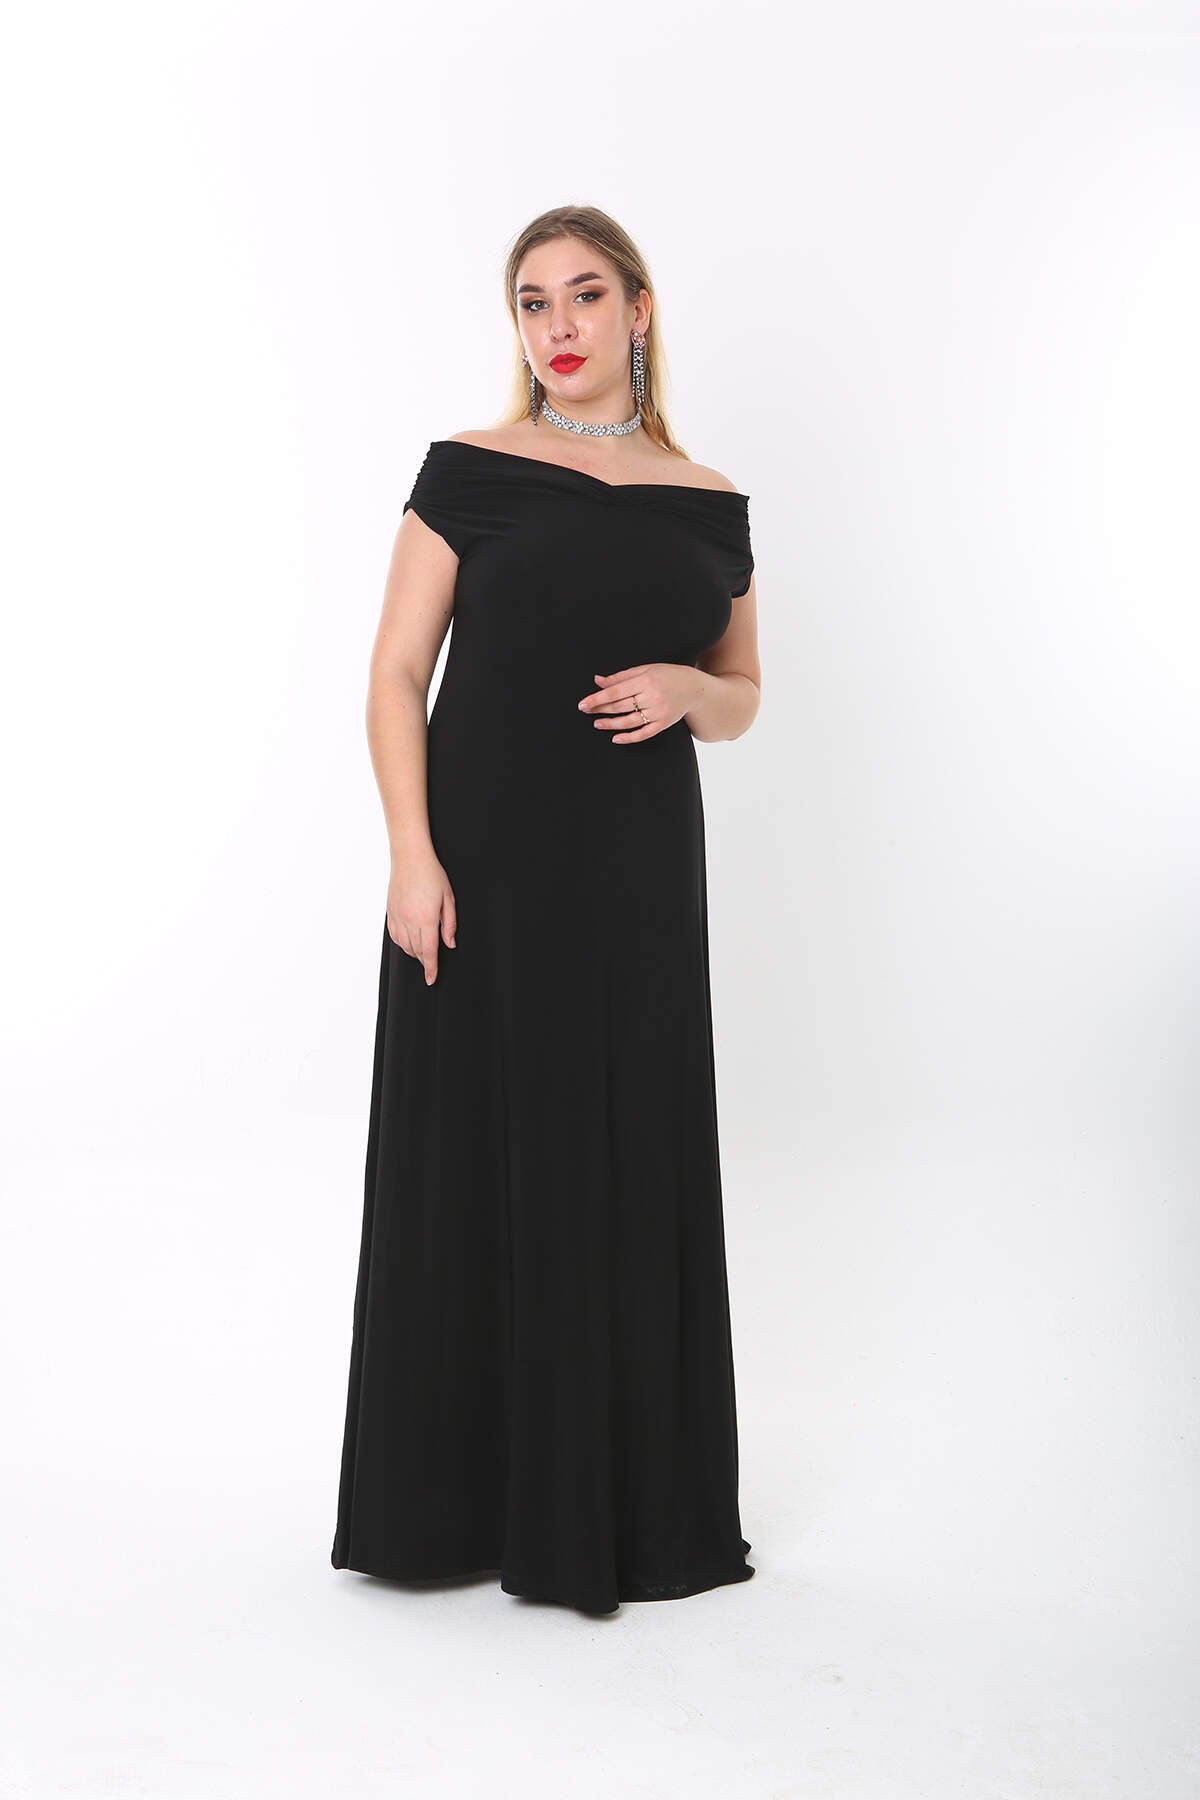 Plus Size Black Sleeveless Collared Evening Gown